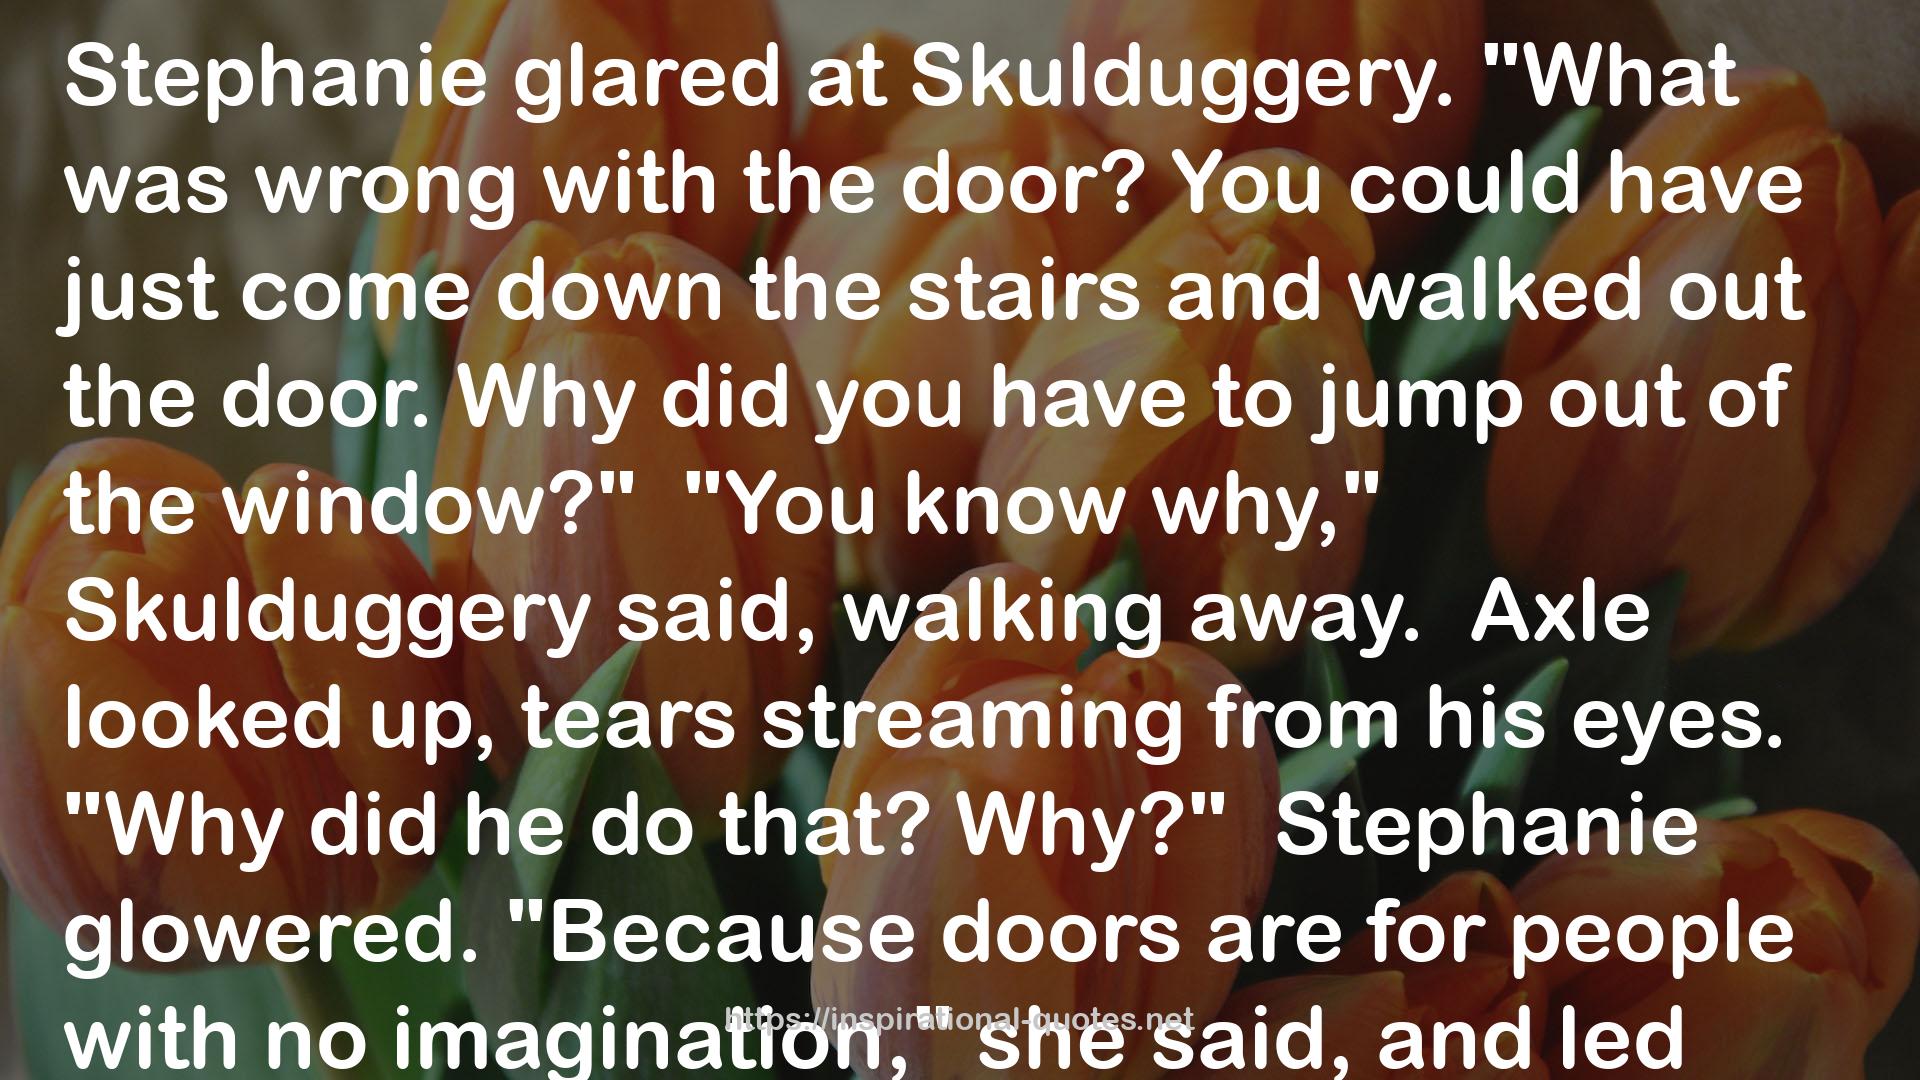 The Dying of the Light (Skulduggery Pleasant, #9) QUOTES